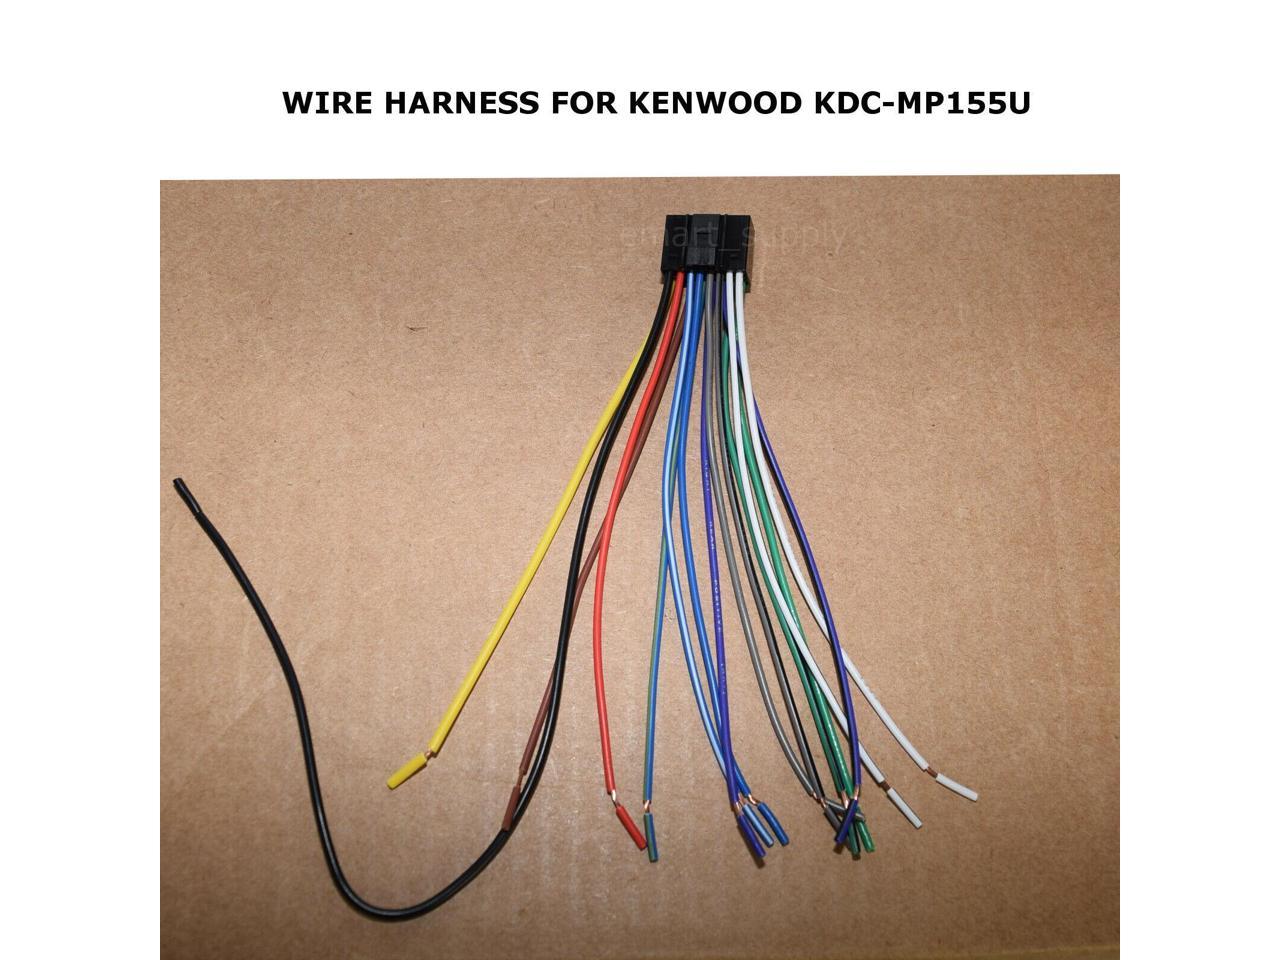 WIRE HARNESS FOR KENWOOD KDC-MP155U KDCMP155U *SHIPS TODAY* 